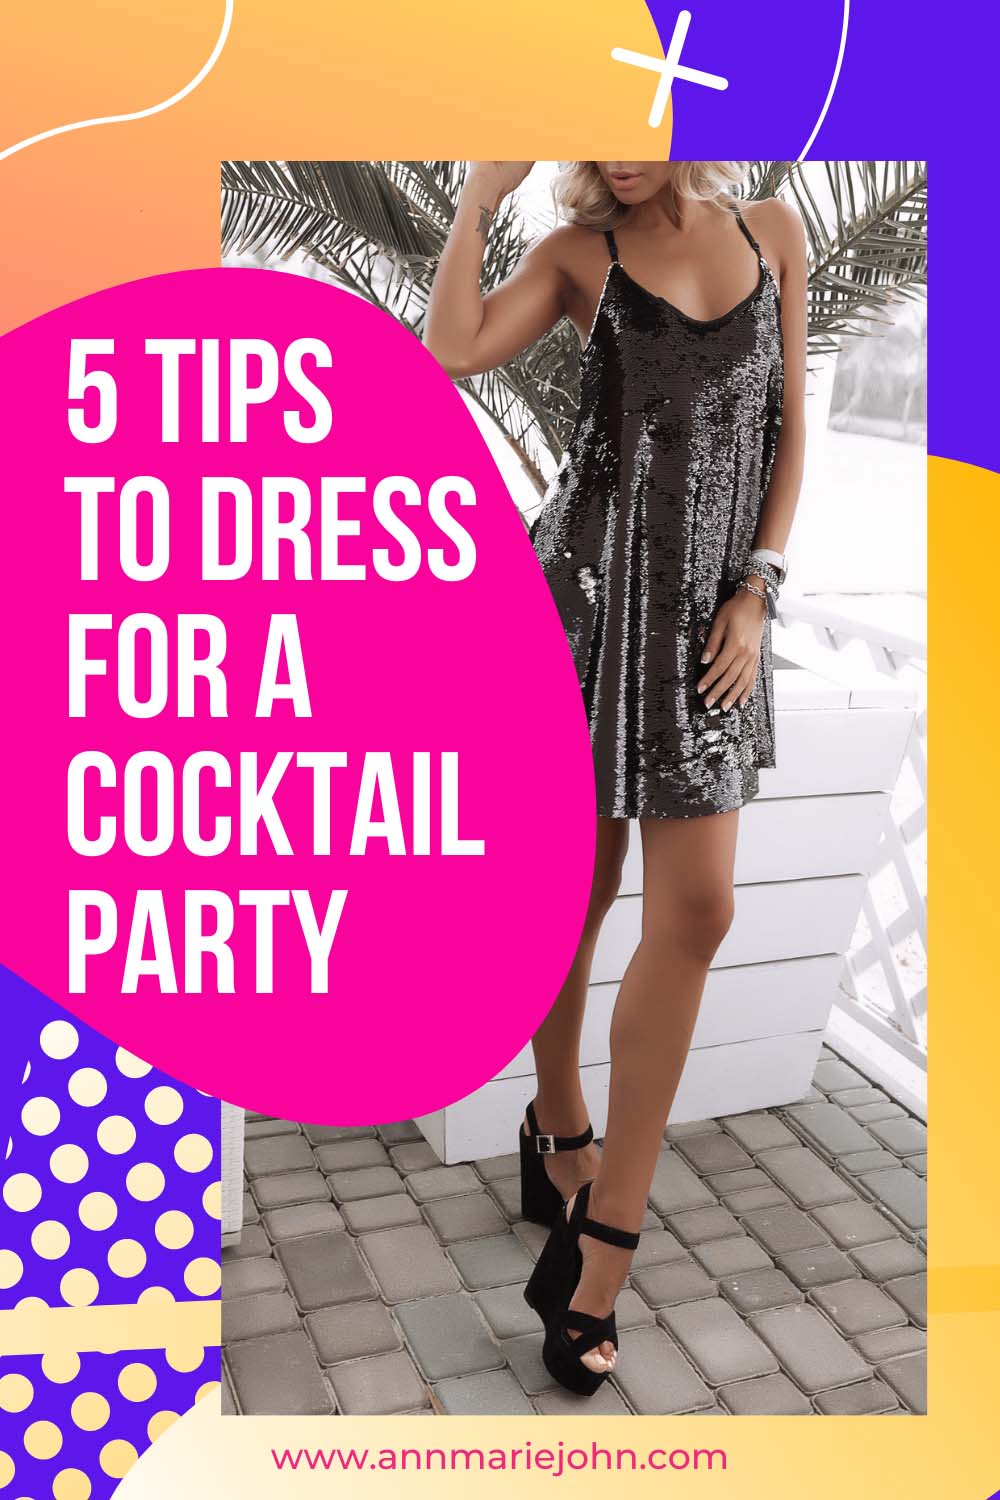 5 Tips To Dress For A Cocktail Party